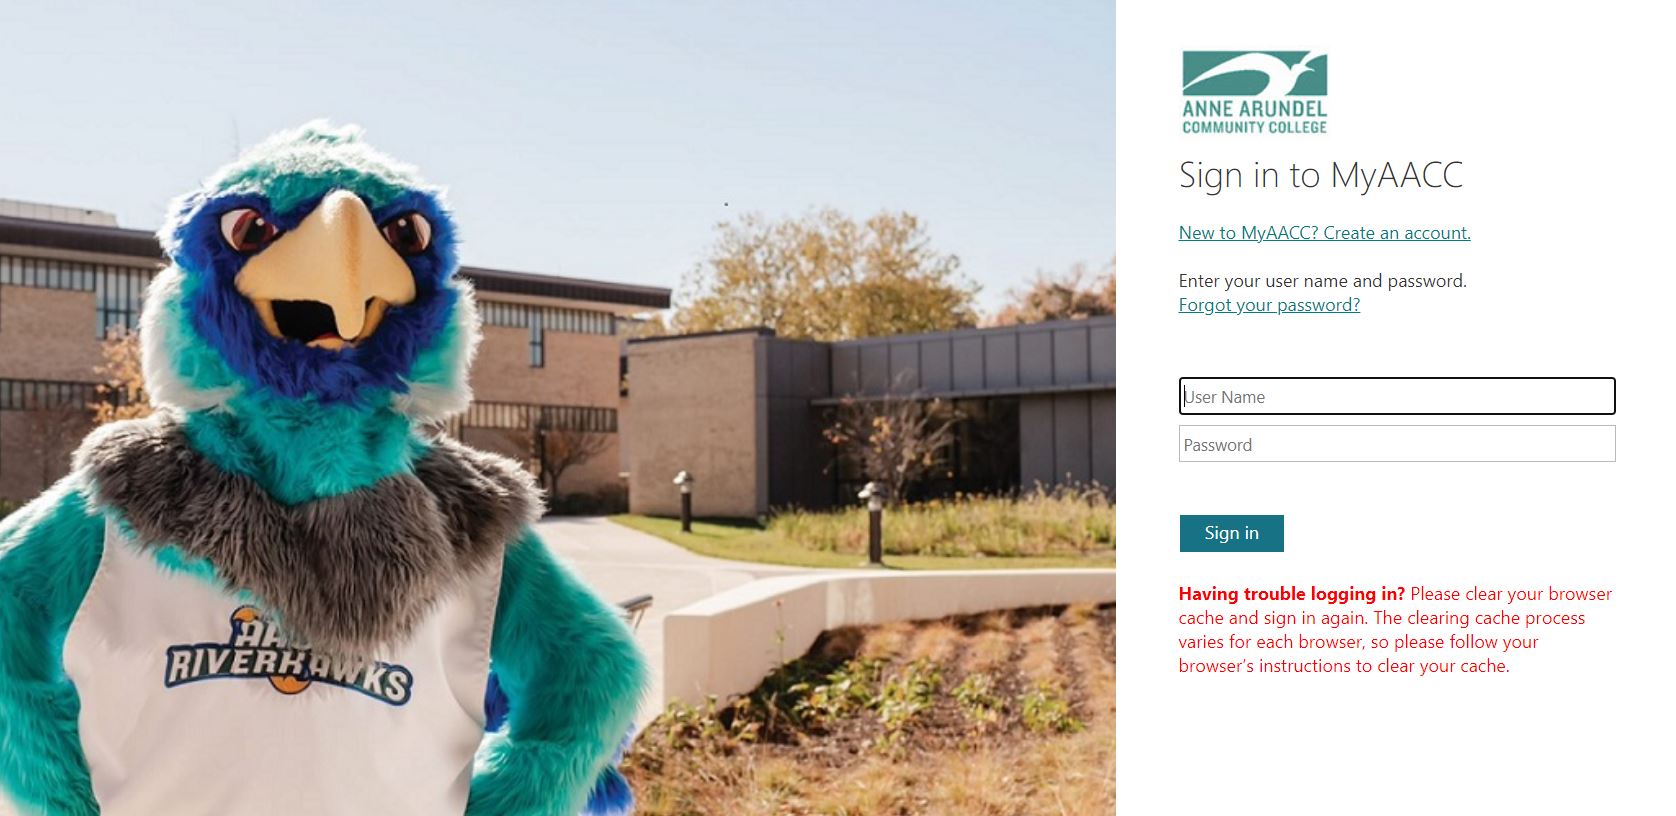 Myaacc Portal  showing the login page with the Riverhawks mascot